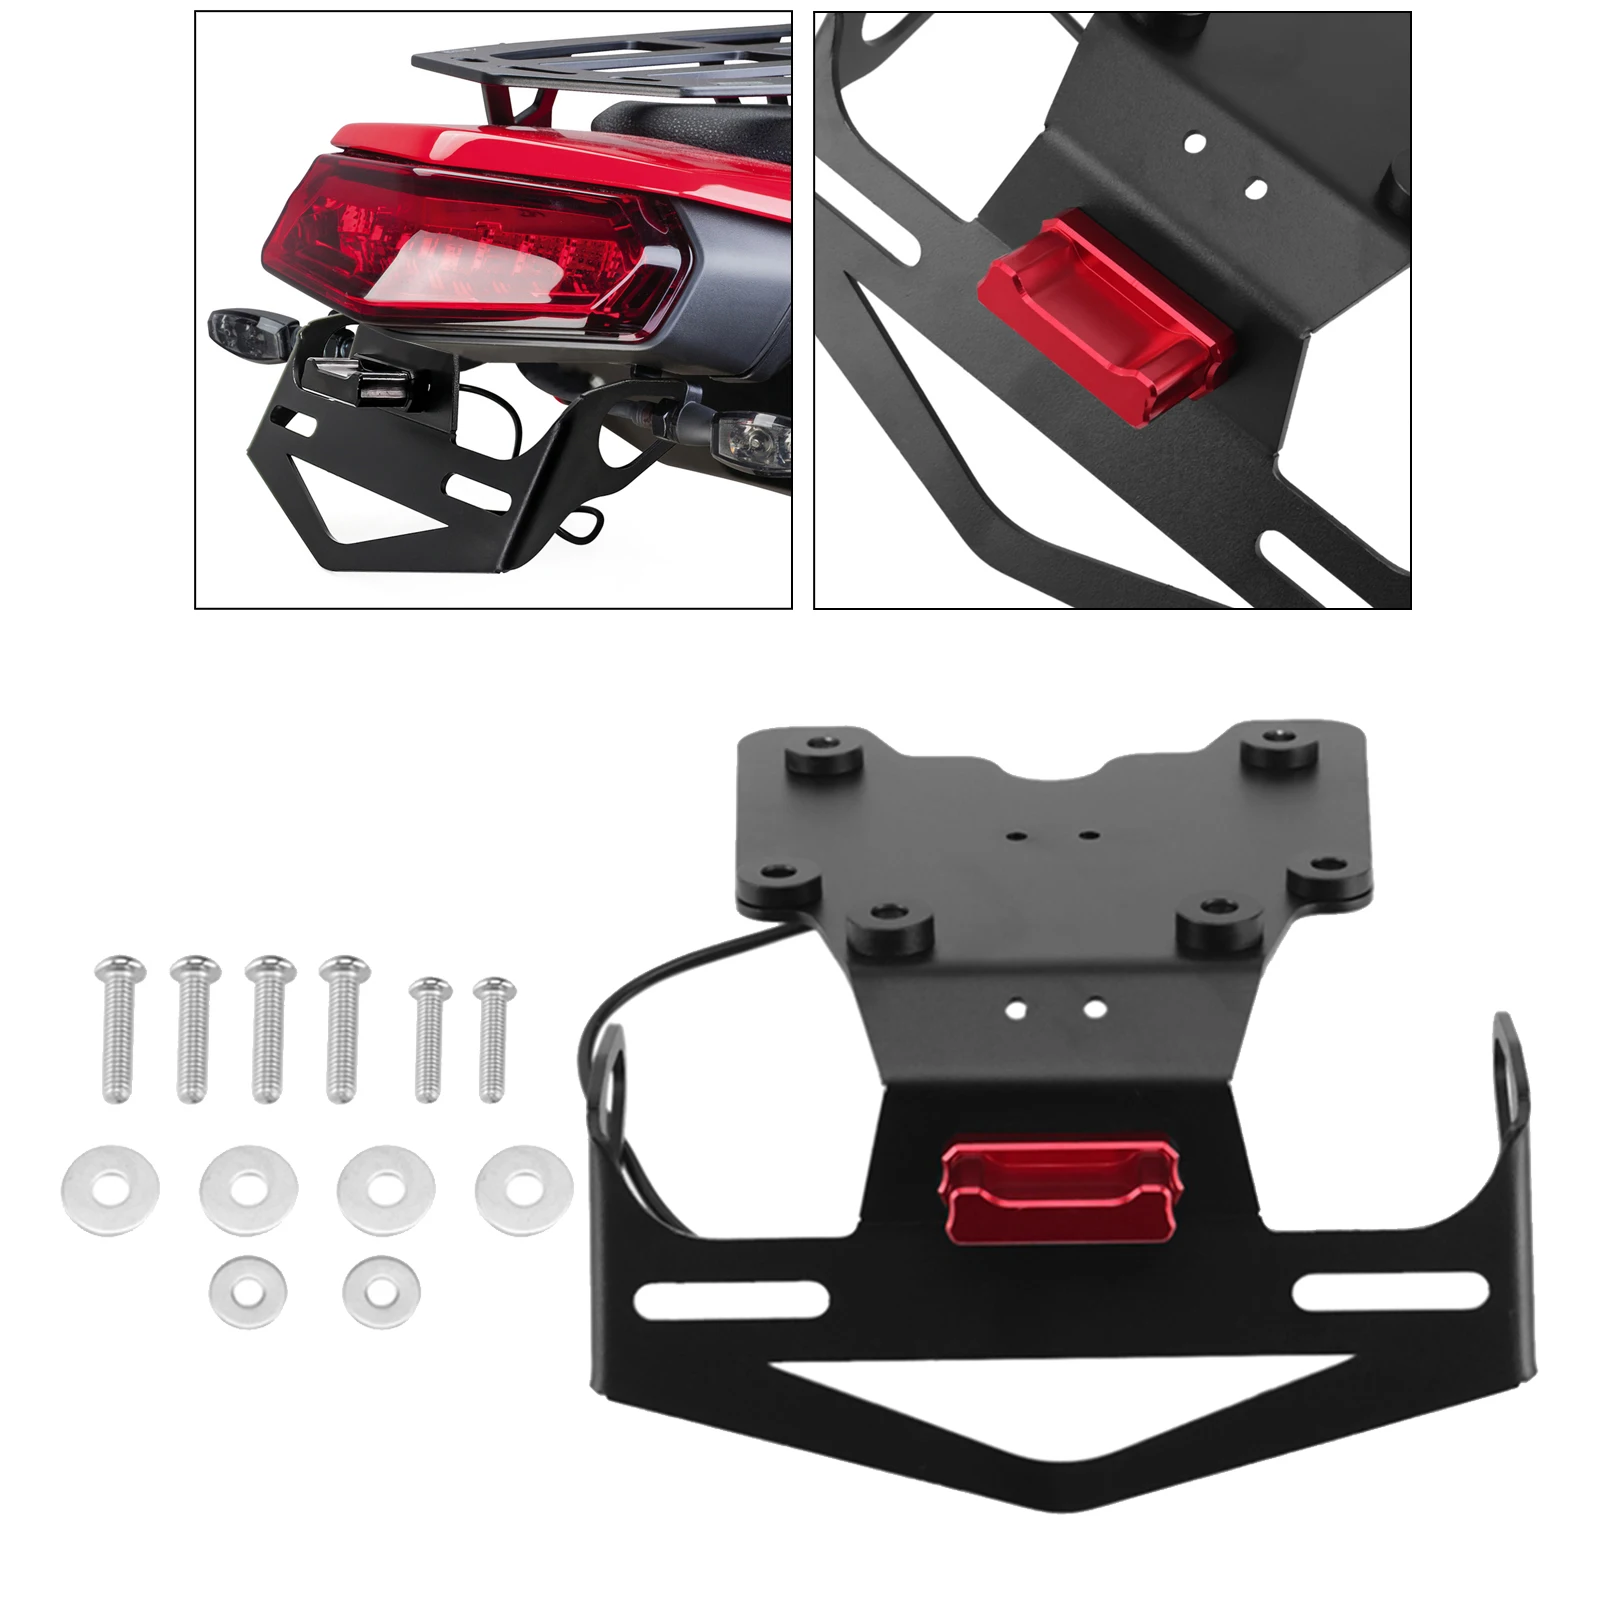 New Motorcycle License Plate Holder Mount Bracket Fits for Tenere 700